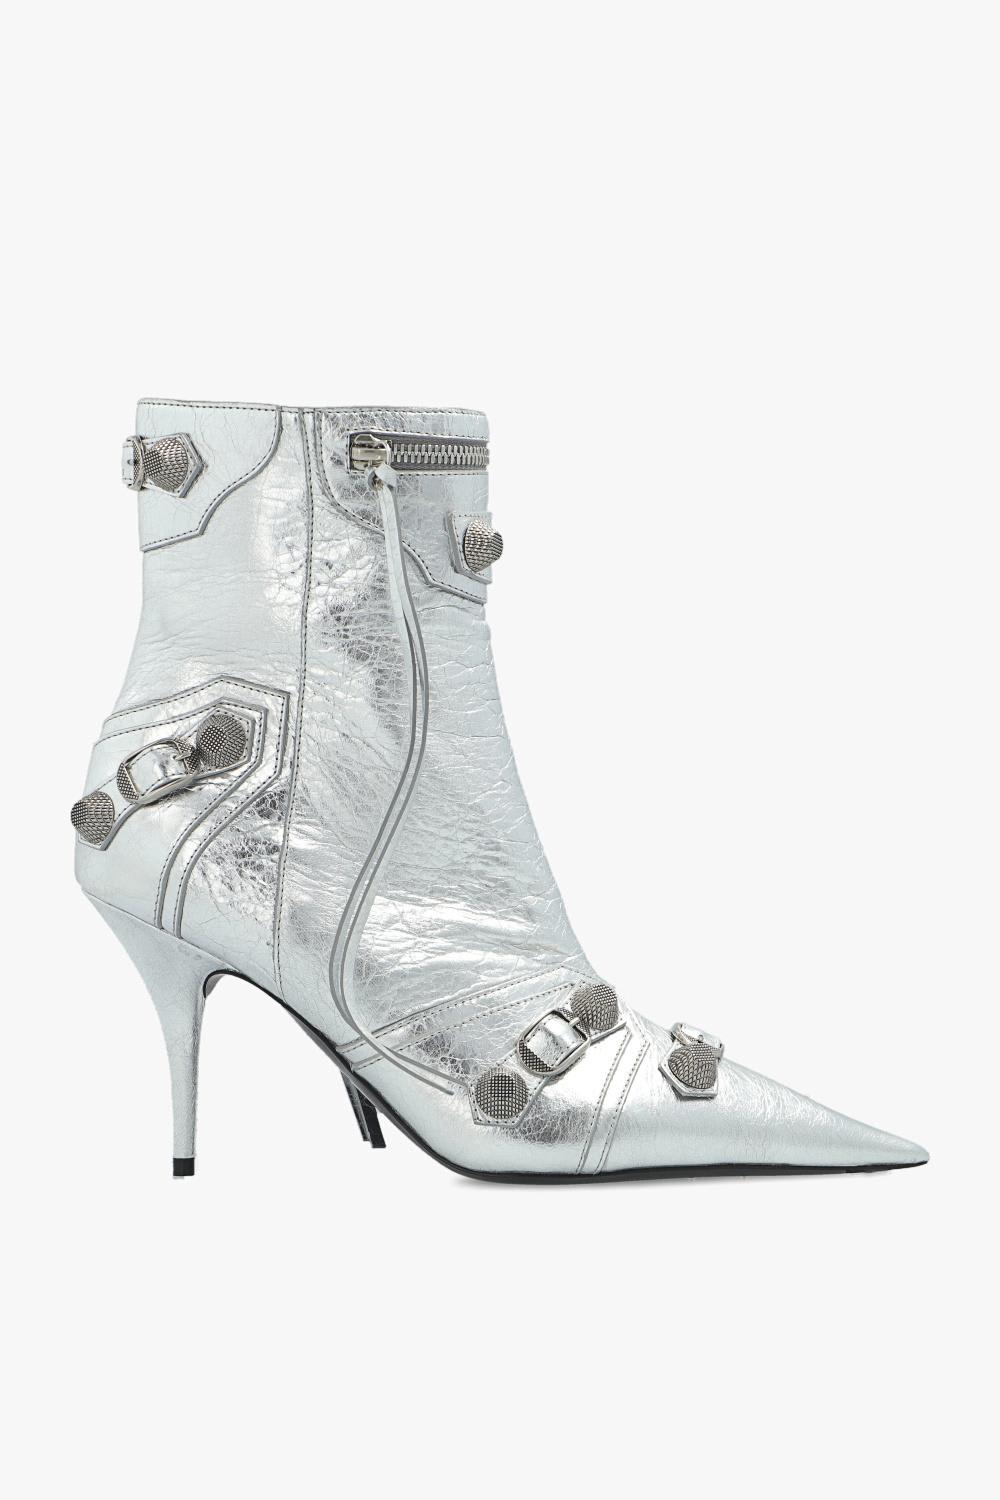 Mama Over The Knee Boots in Silver  Paris Texas  Mytheresa